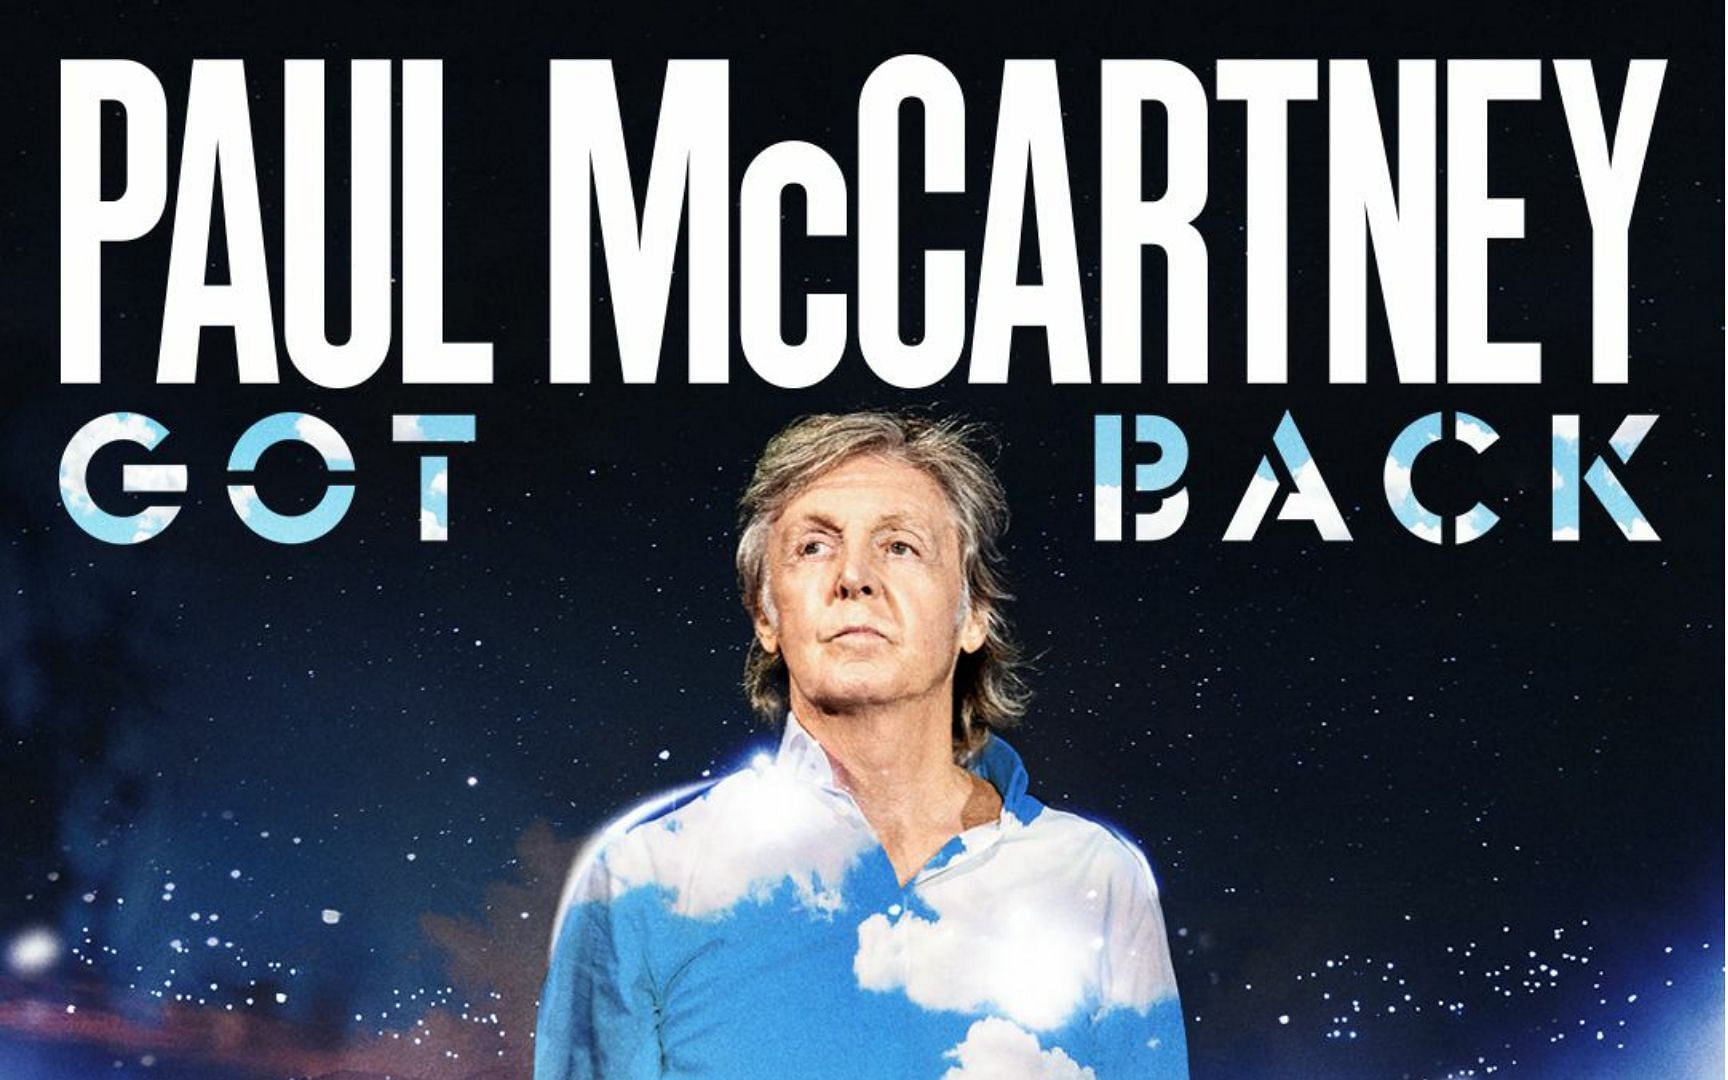 Paul McCartney is set to return to the road this spring, with a slate of 14 American dates announced on Friday under the moniker of Got Back tour. (Image via Instagram @paulmccartney)